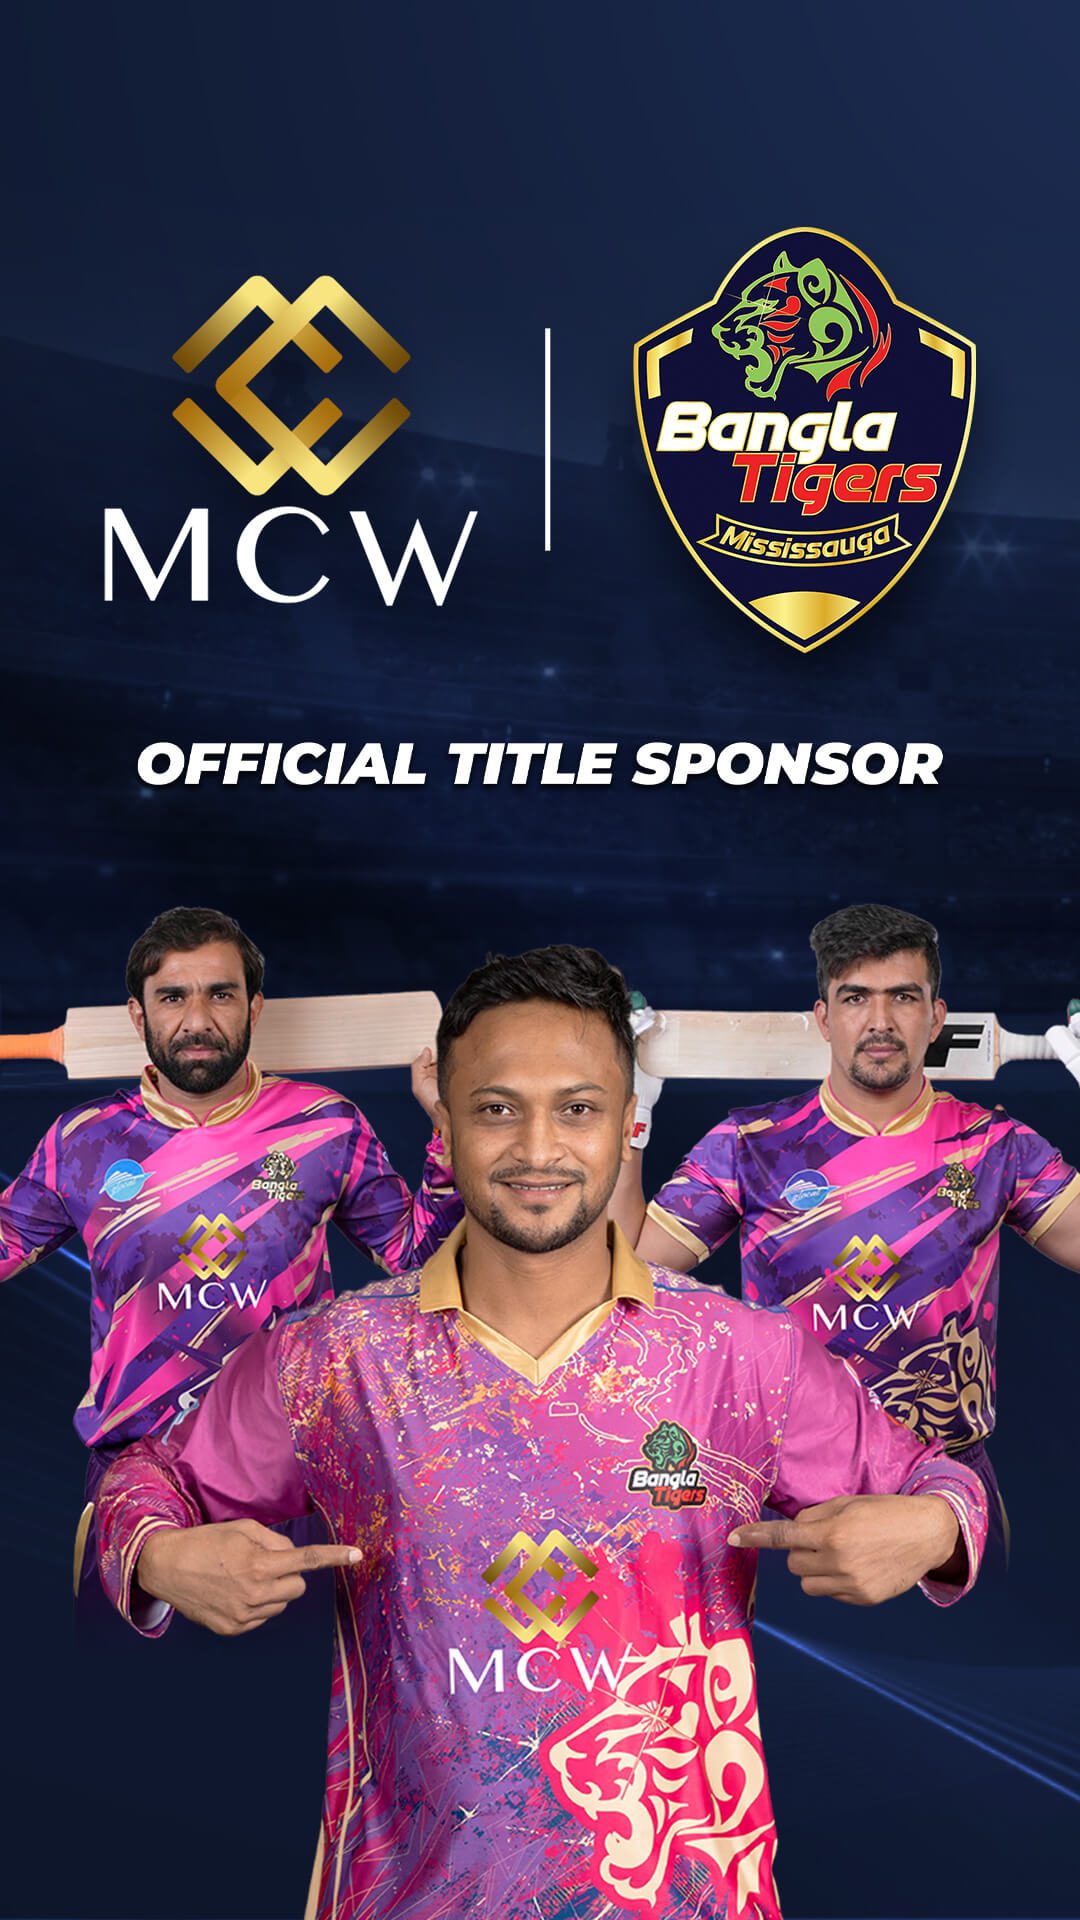 MCW Thunders Into the Cricket Scene with the Mississauga Partnership of the Bangla Tigers